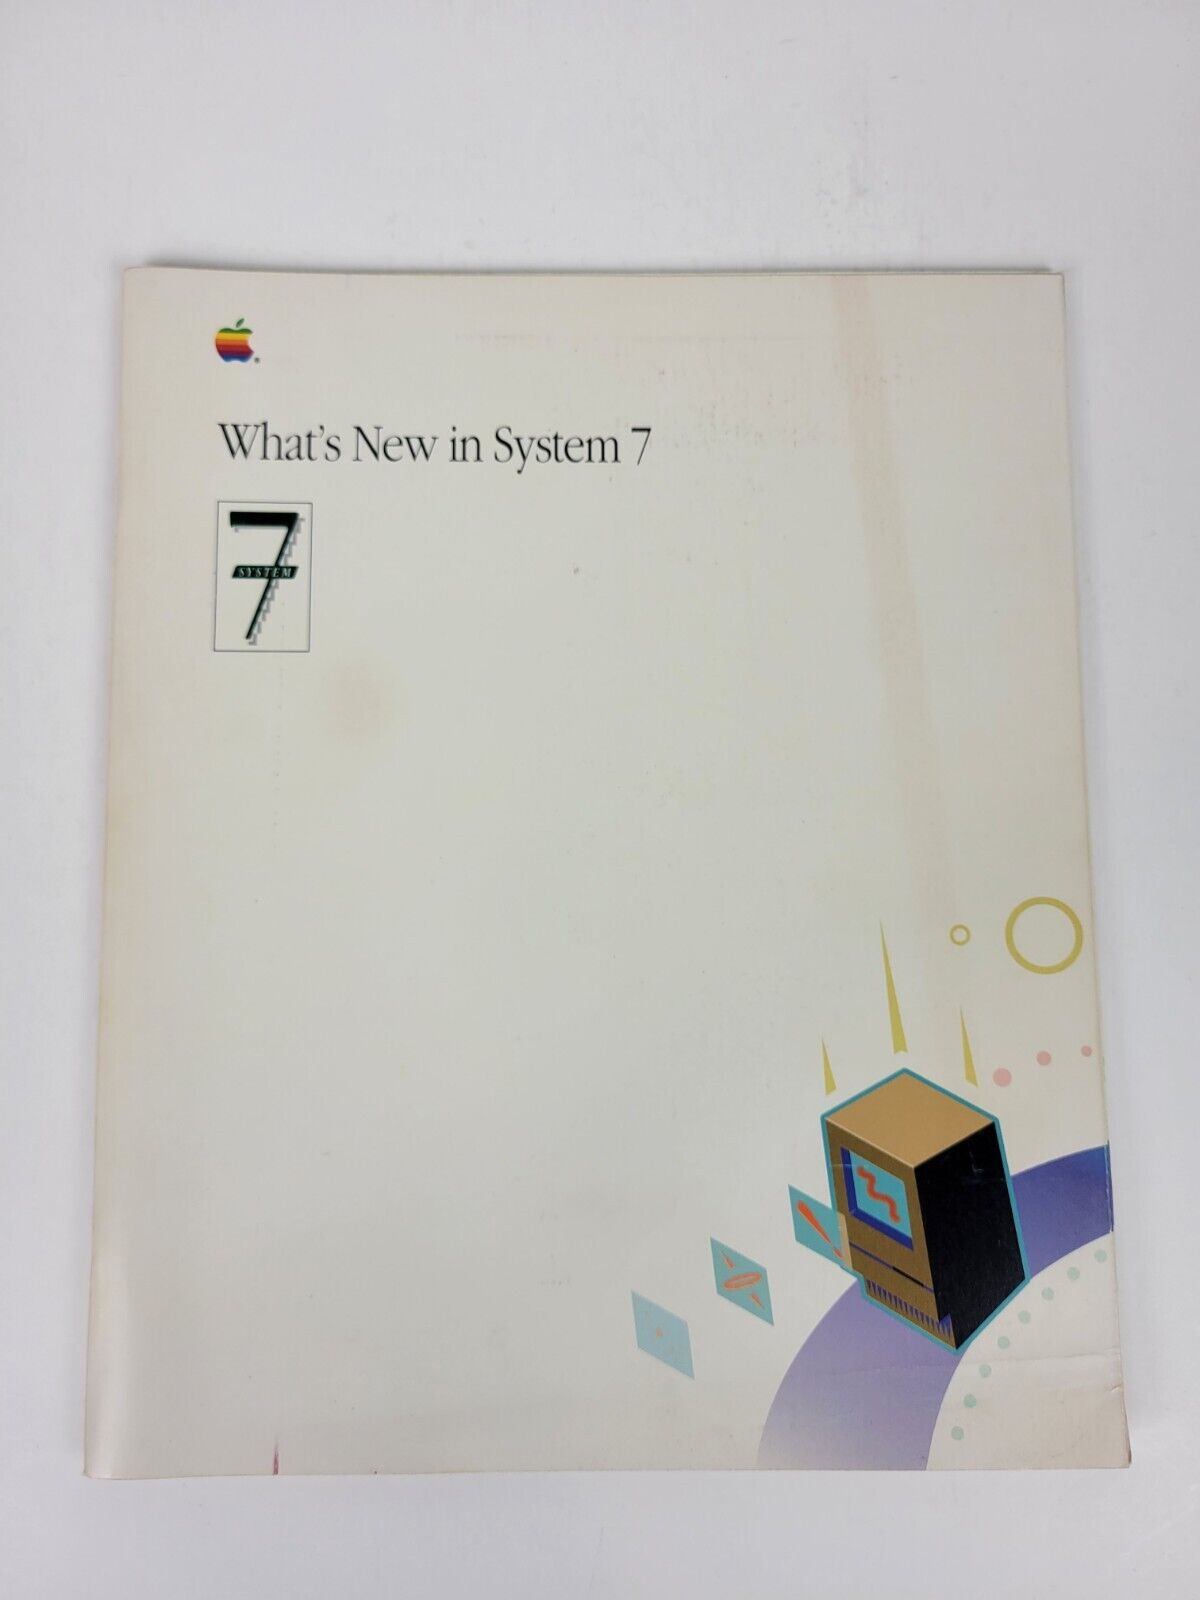 Vtg 1991 Apple Computer Mac Macintosh Whats New In System 7 OS Program Manual